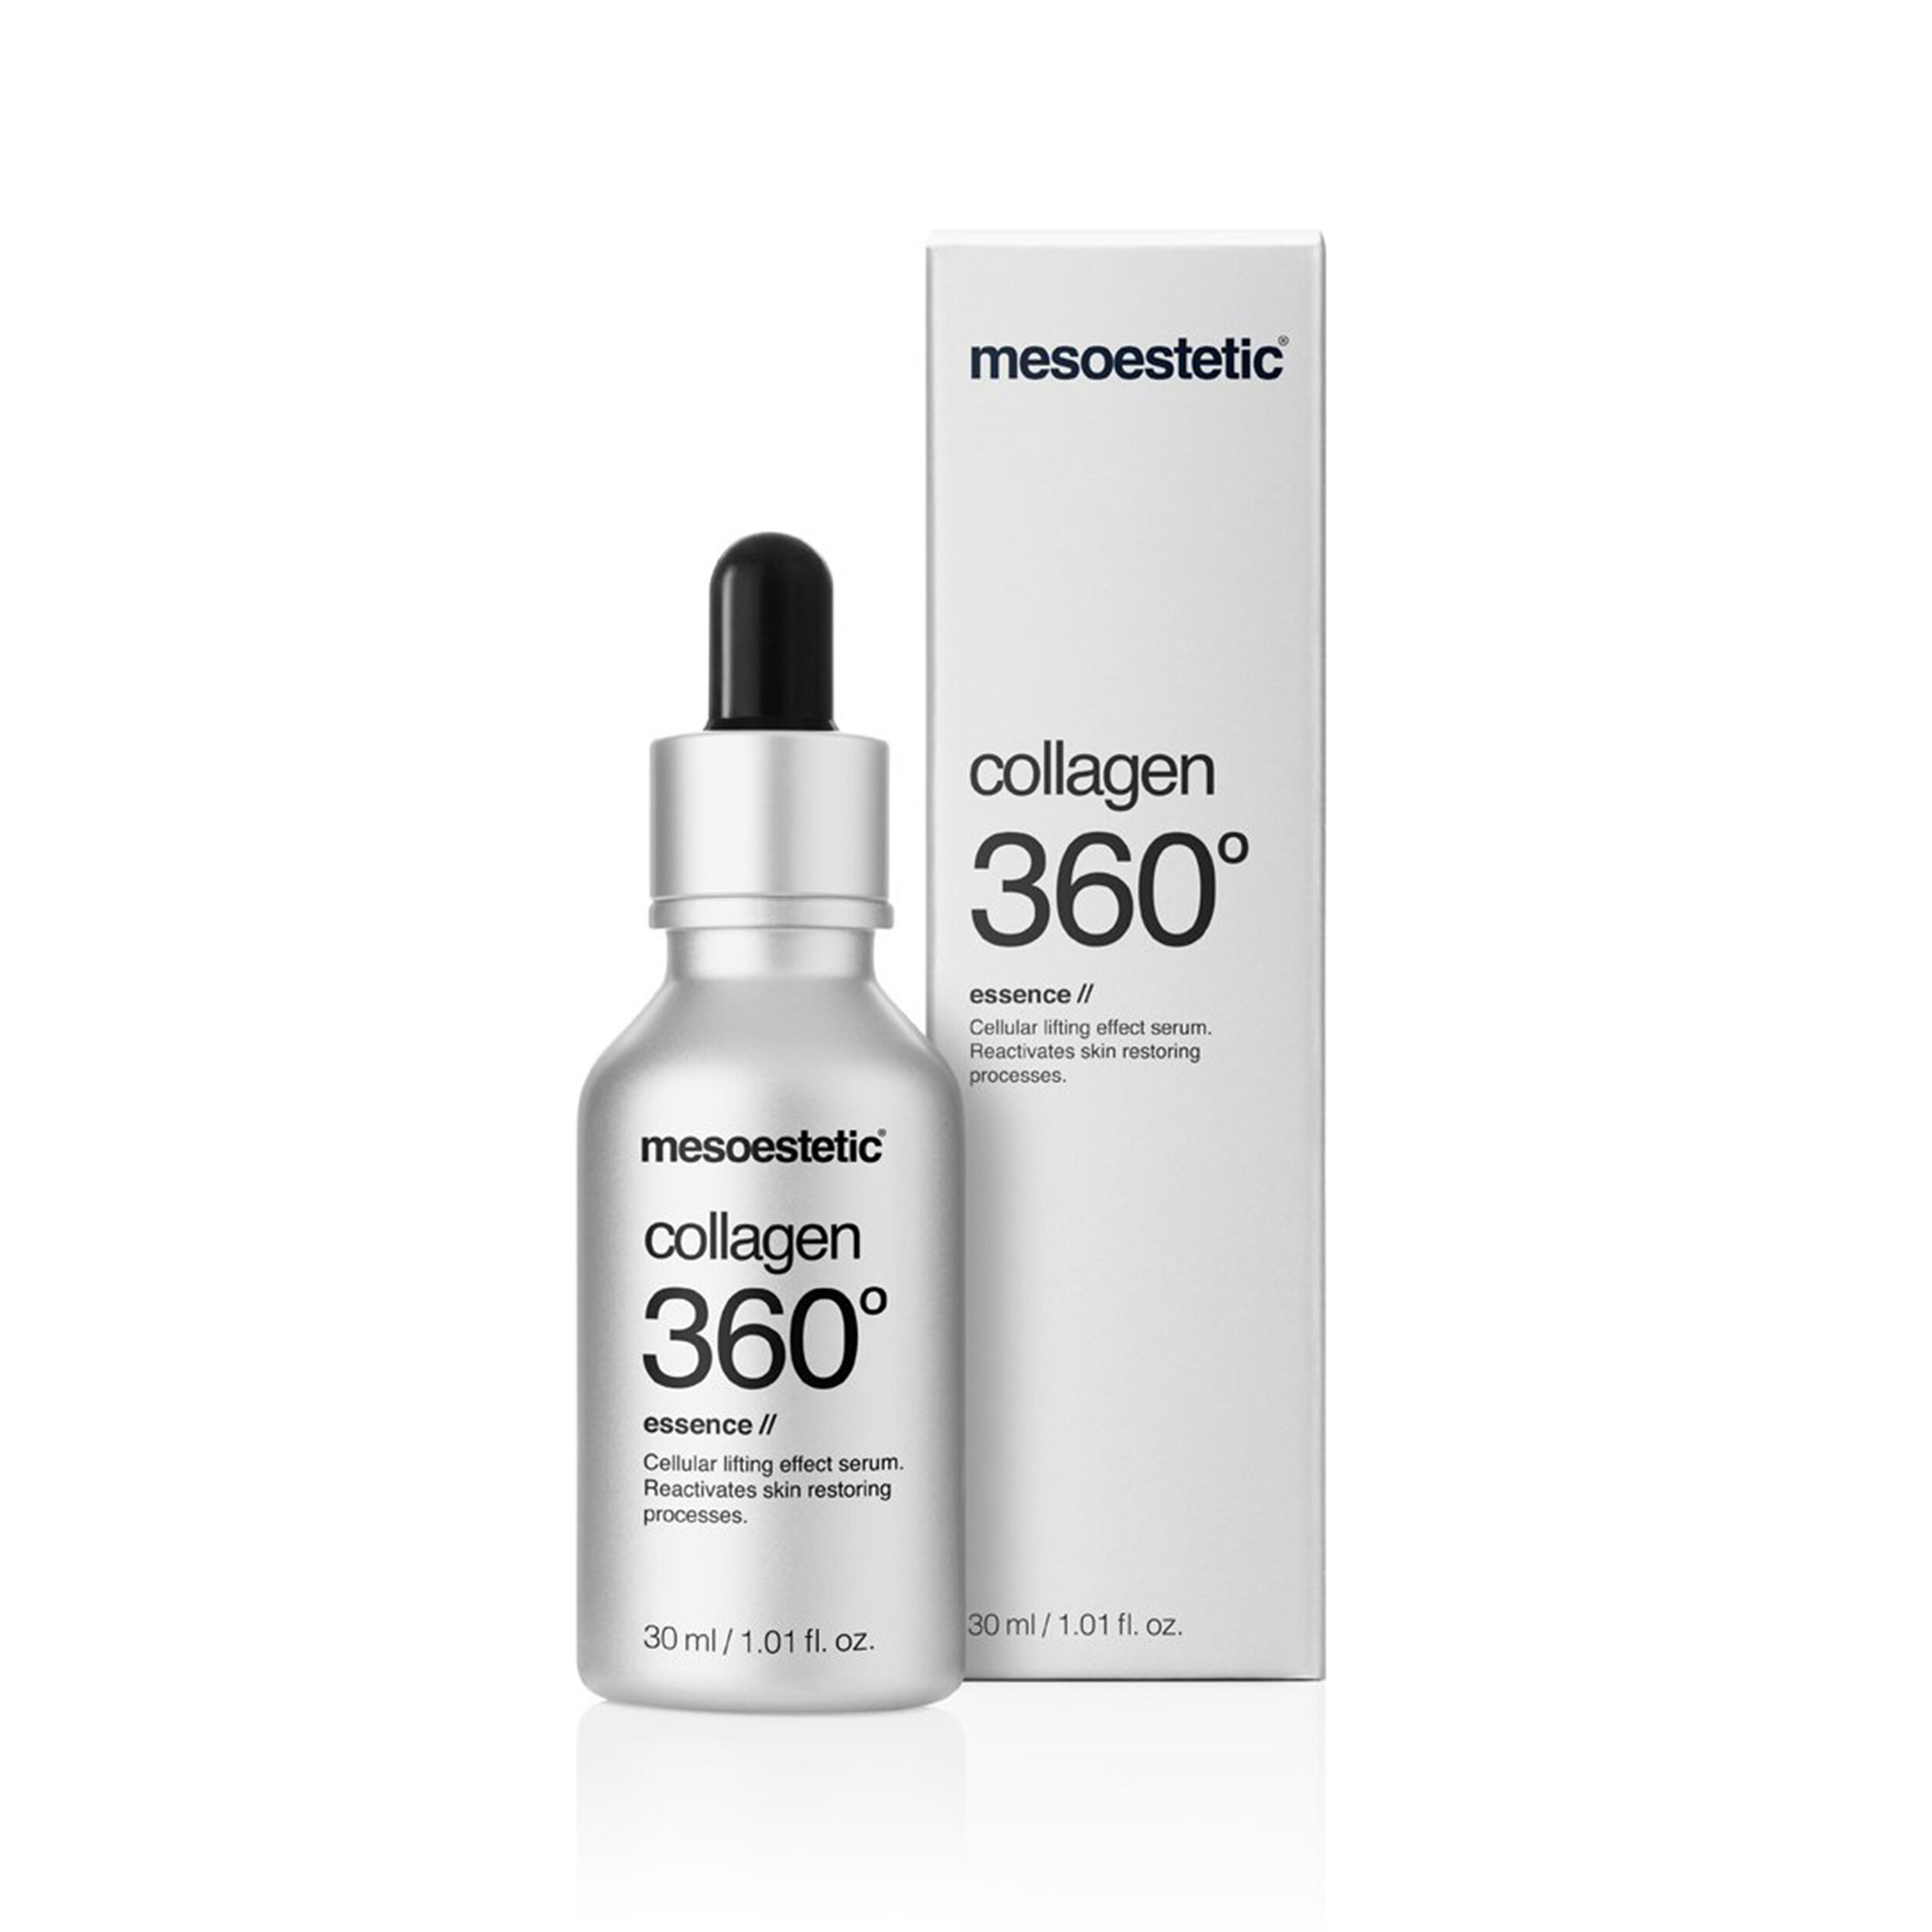 Cell effect. Mesoestetic Collagen 360 сыворотка. Коллаген 360 мезоэстетик. Коллаген питьевой 360 Mesoestetic. Мезоэстетик коллаген 360 для лица.